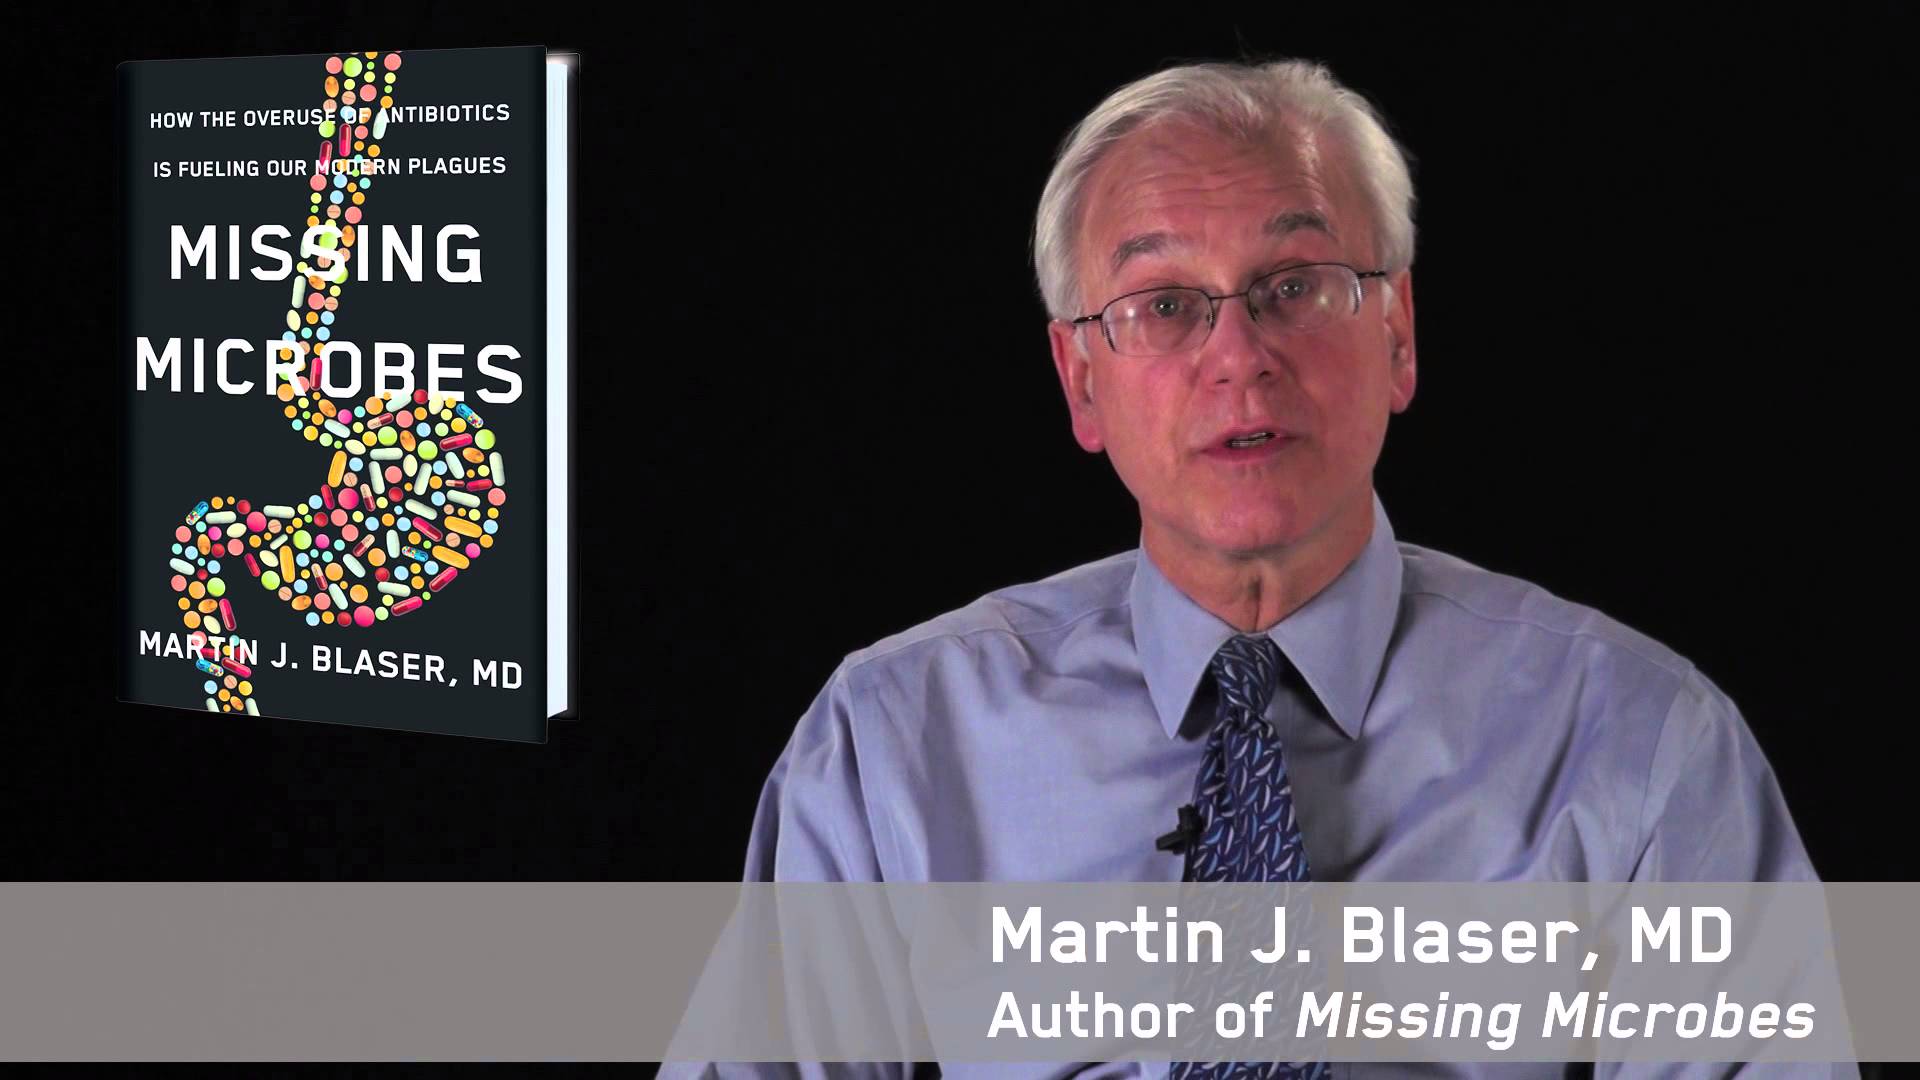 author of Missing Microbes: